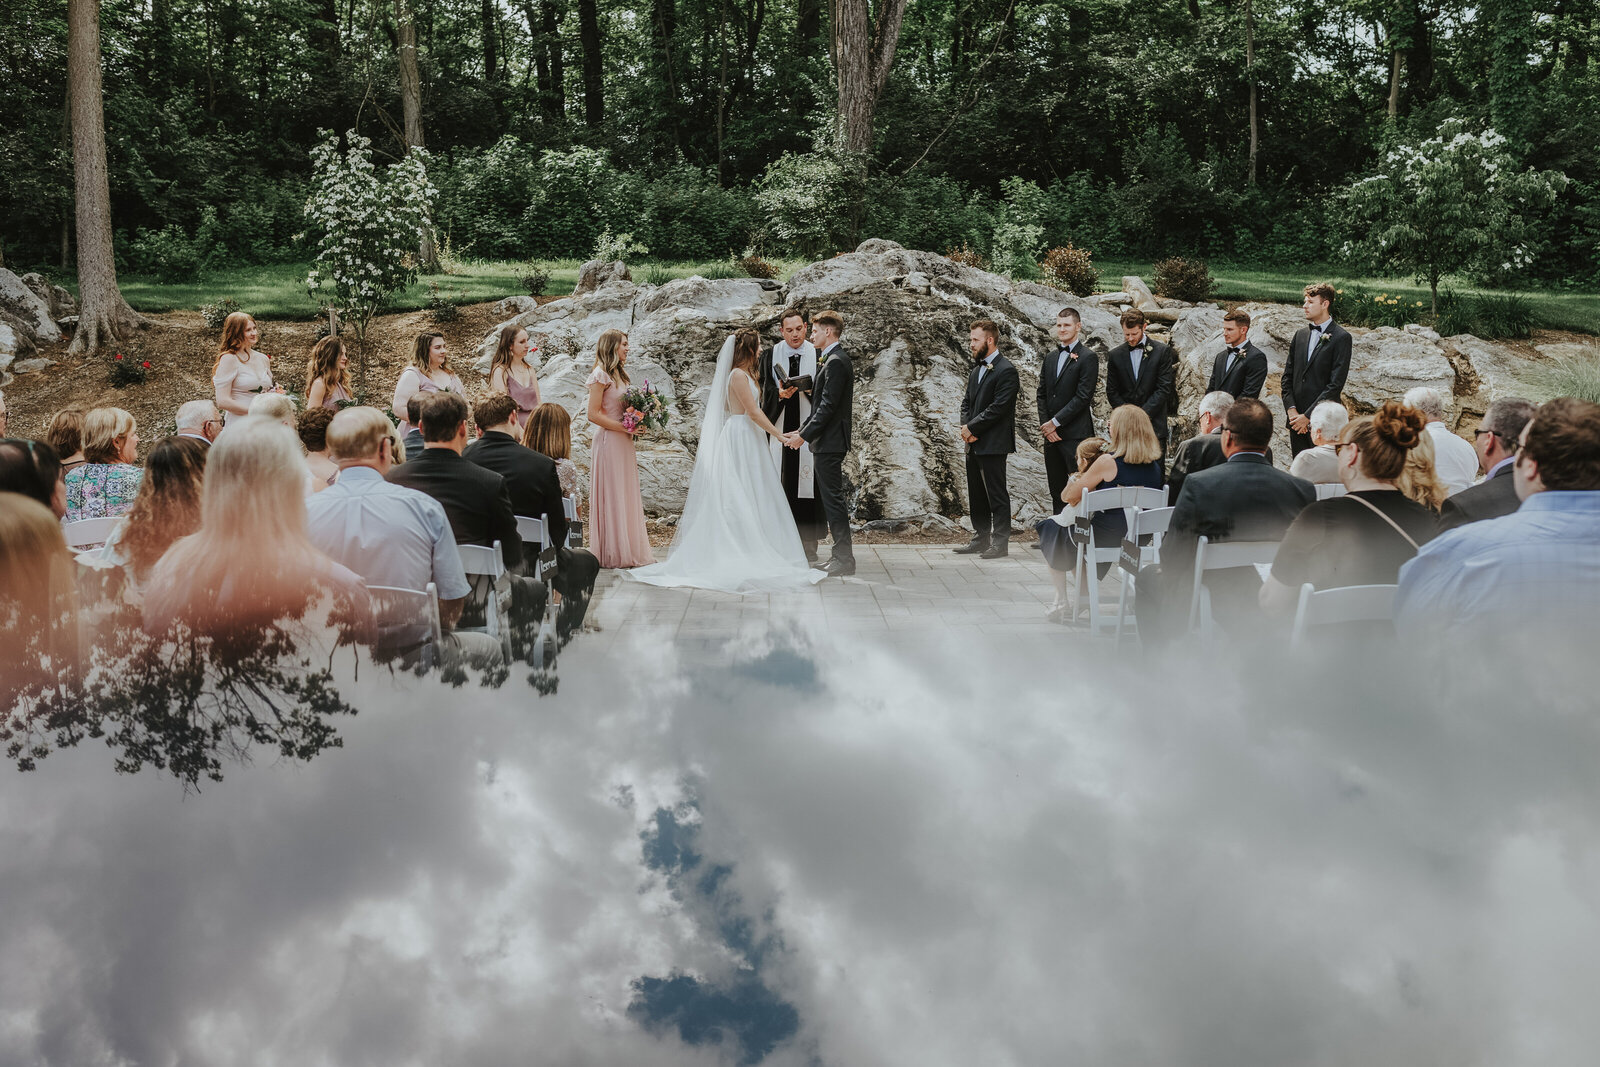 The sky reflects on the ground during a wedding ceremony